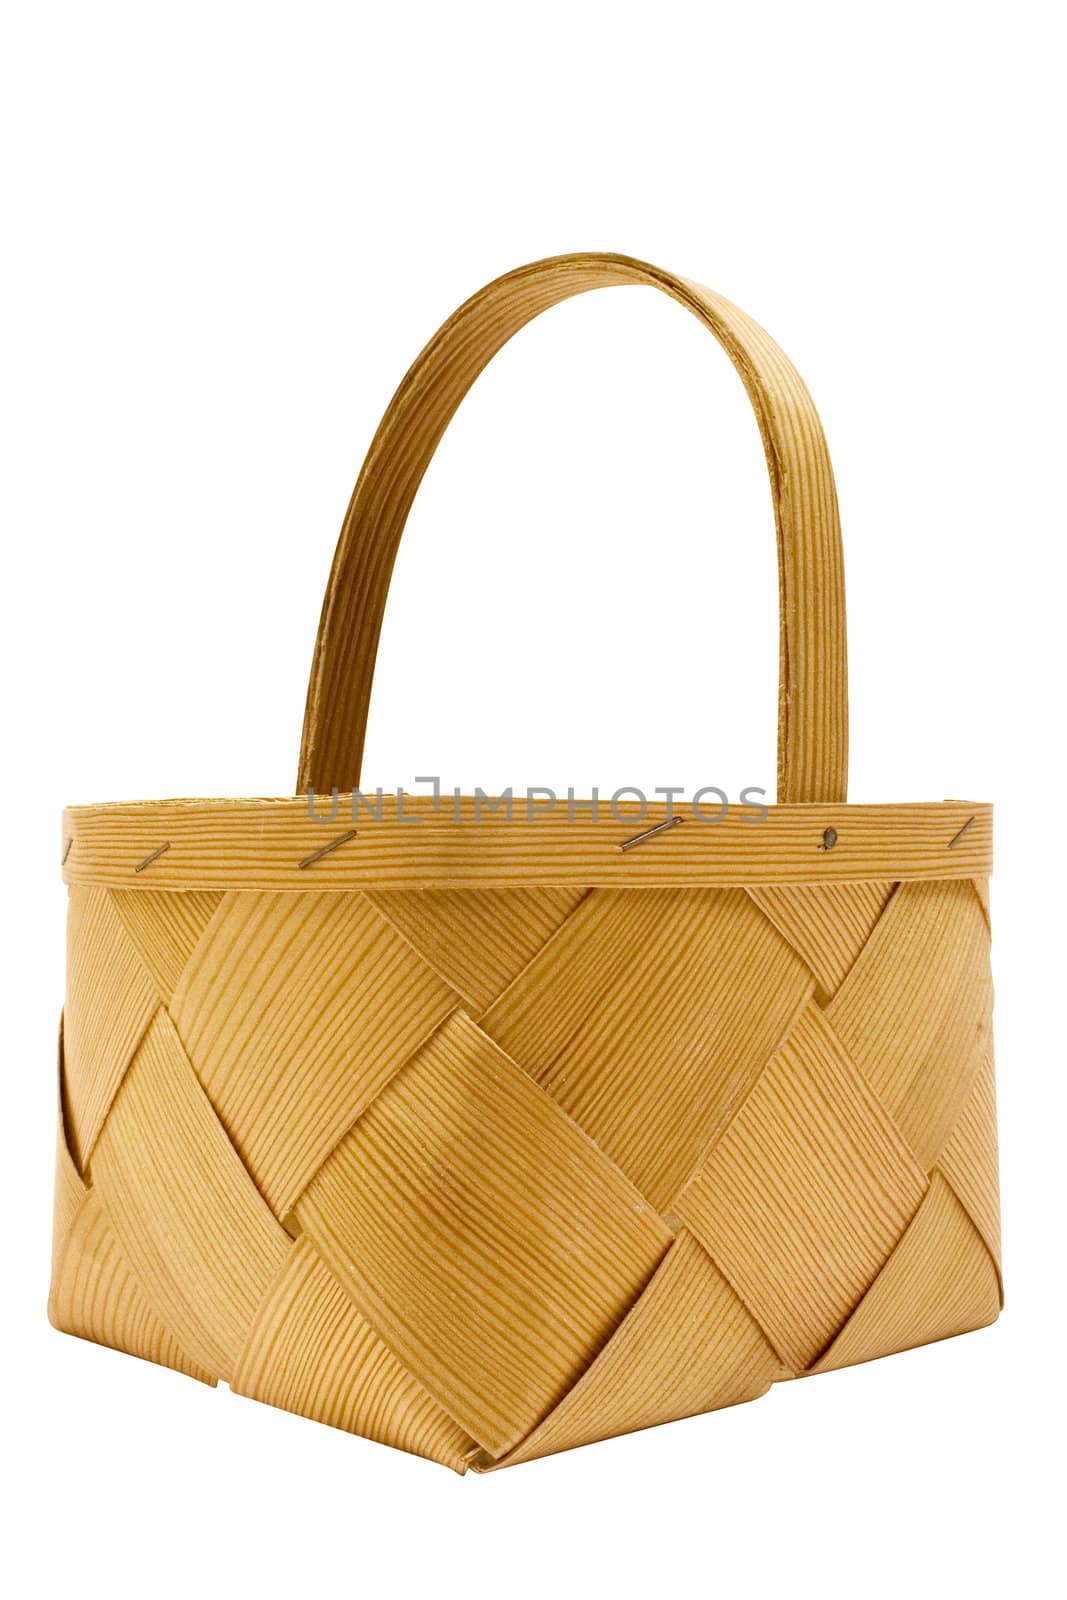 Basket with Clipping Path by winterling